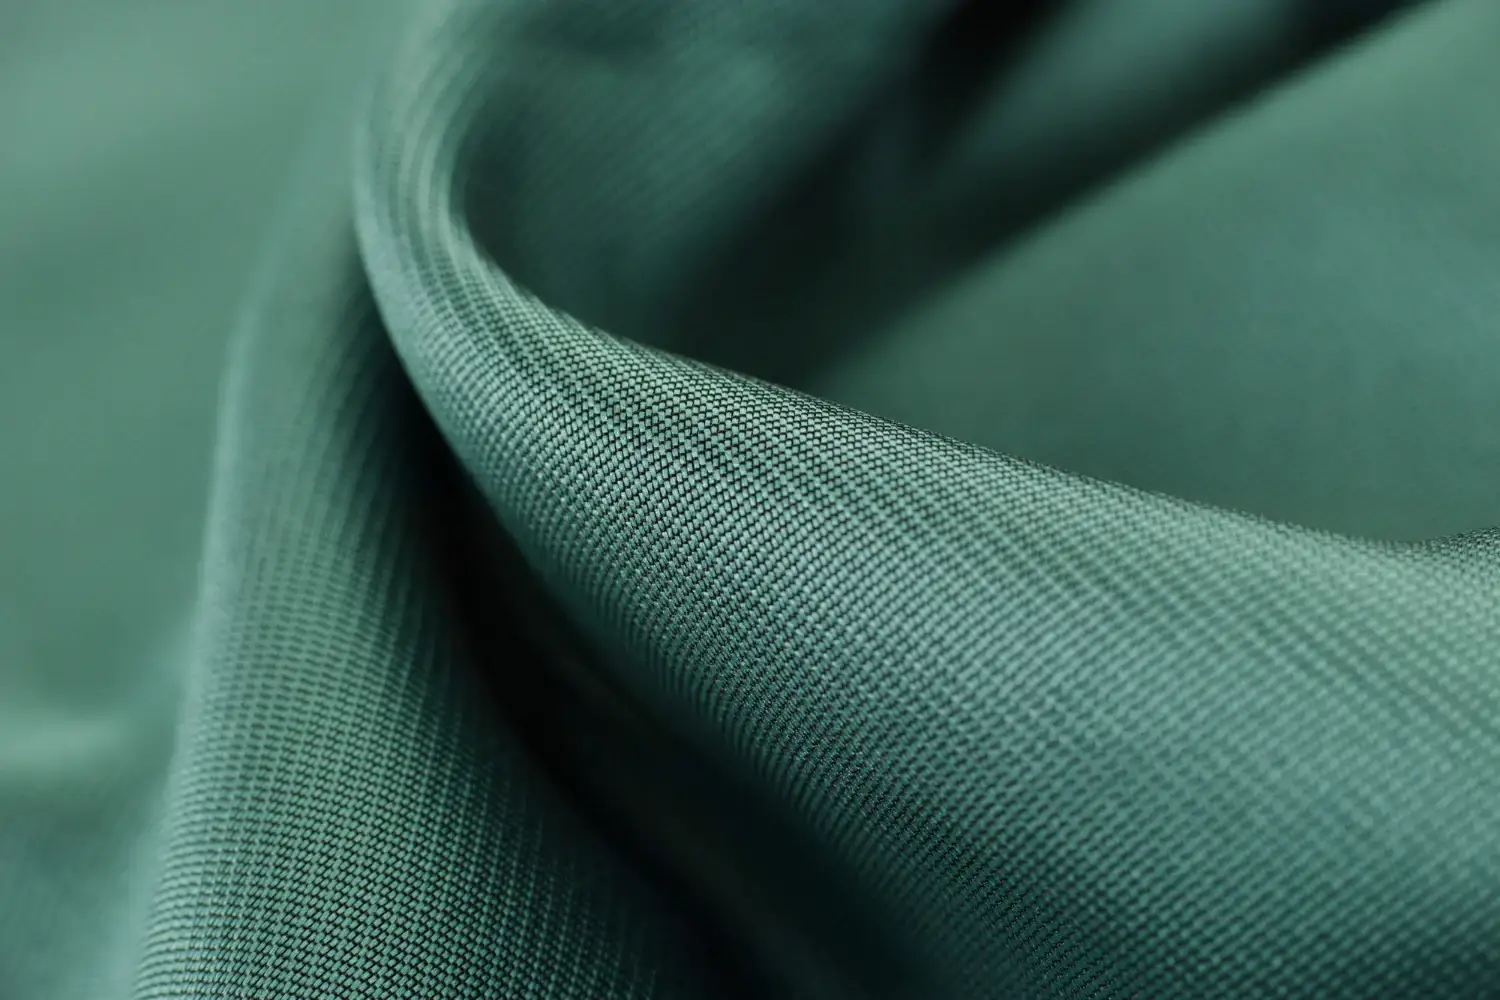 A close up of a green olefin fabric